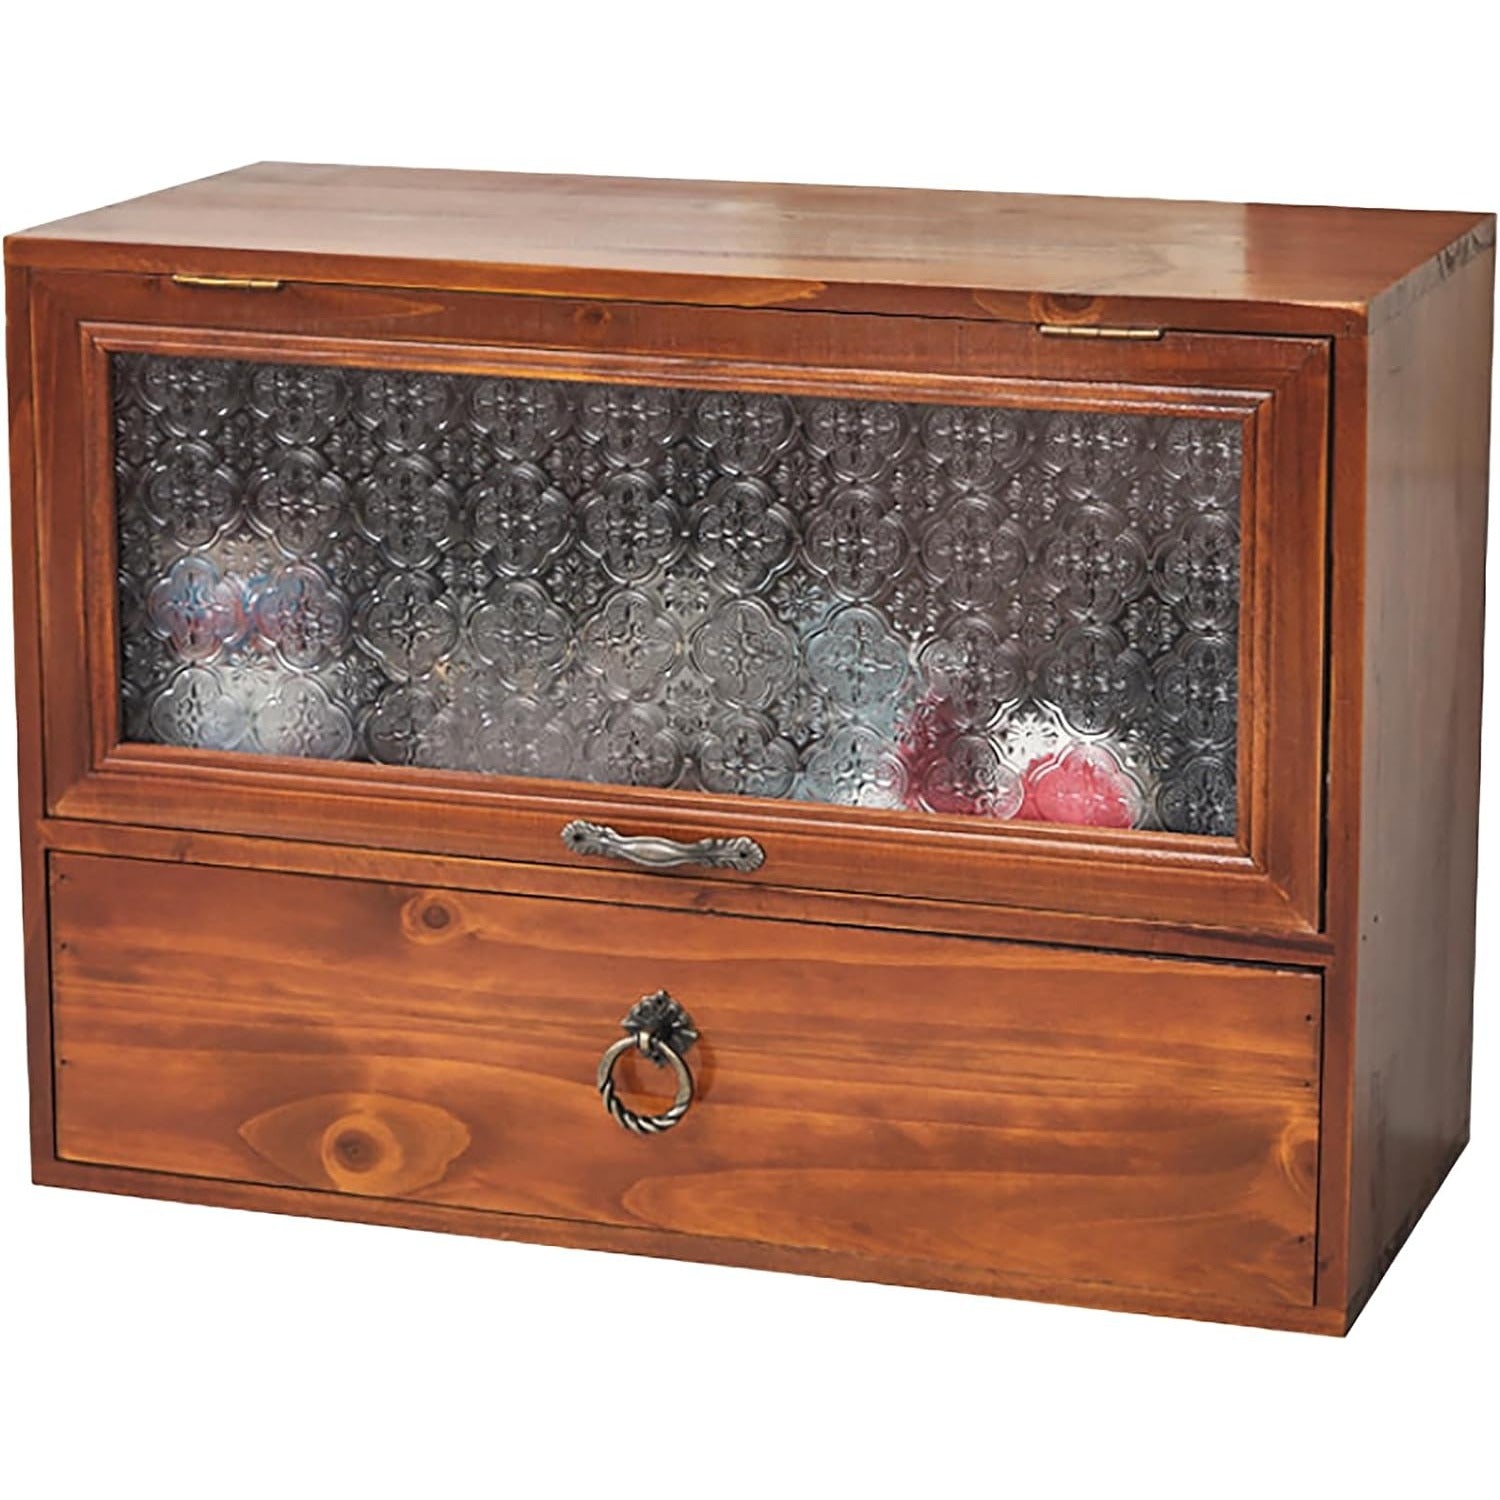 Load image into Gallery viewer, Charming Millefiori Glass &amp; Wood Organizer - 2-Tier Desk Cabinet with Glass Front Drawer for Home &amp; Office